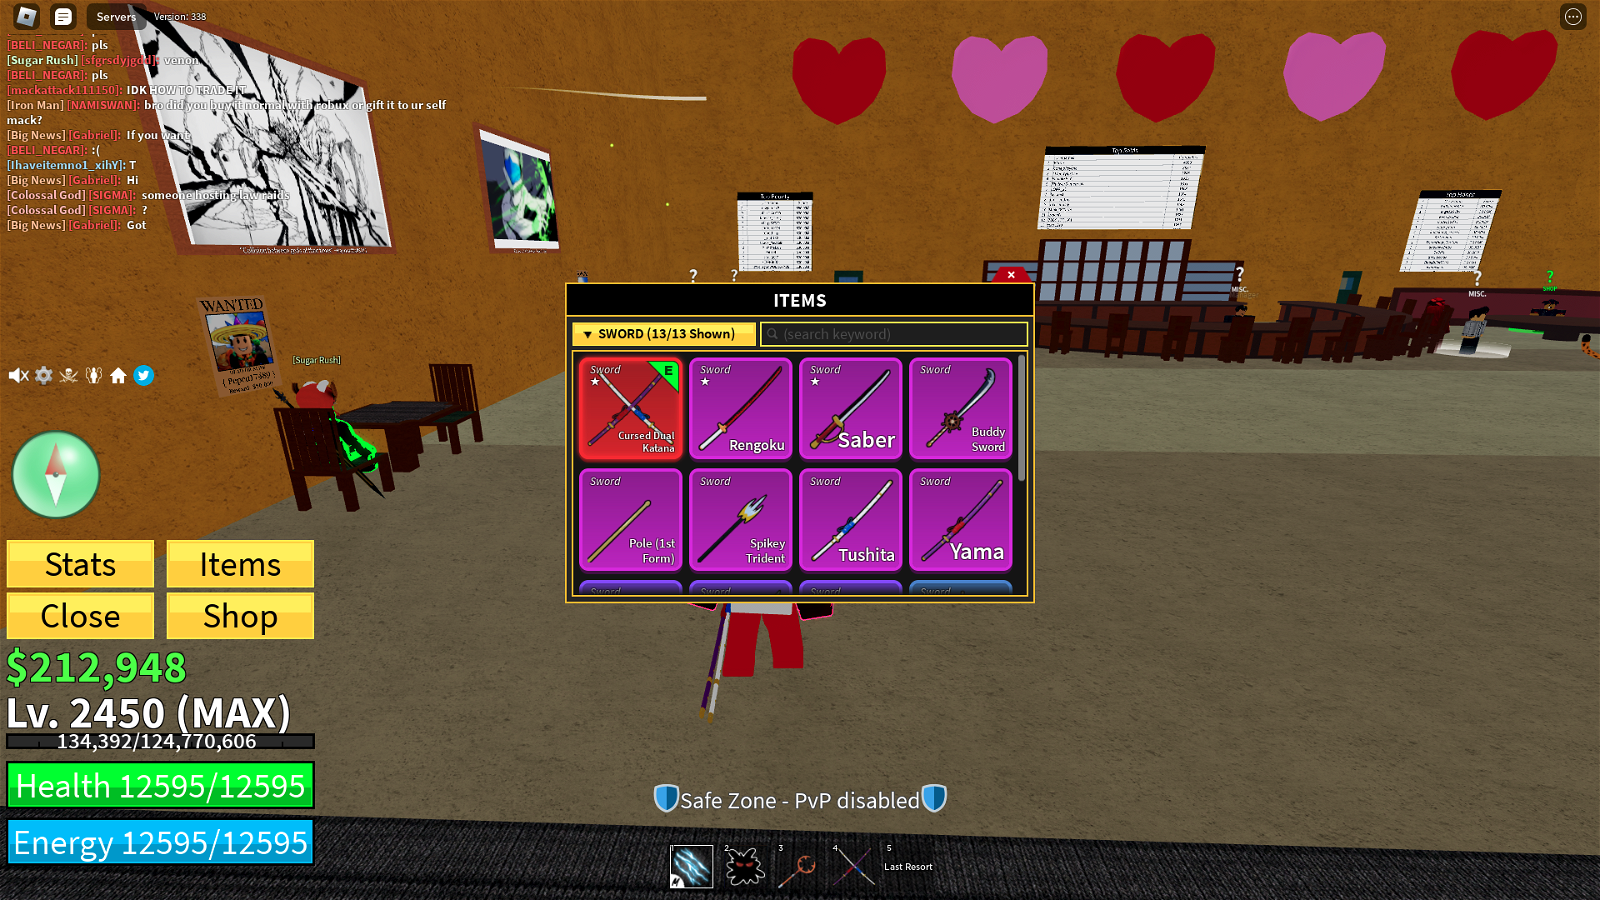 How To Get The Cursed Dual Katana In Blox Fruits